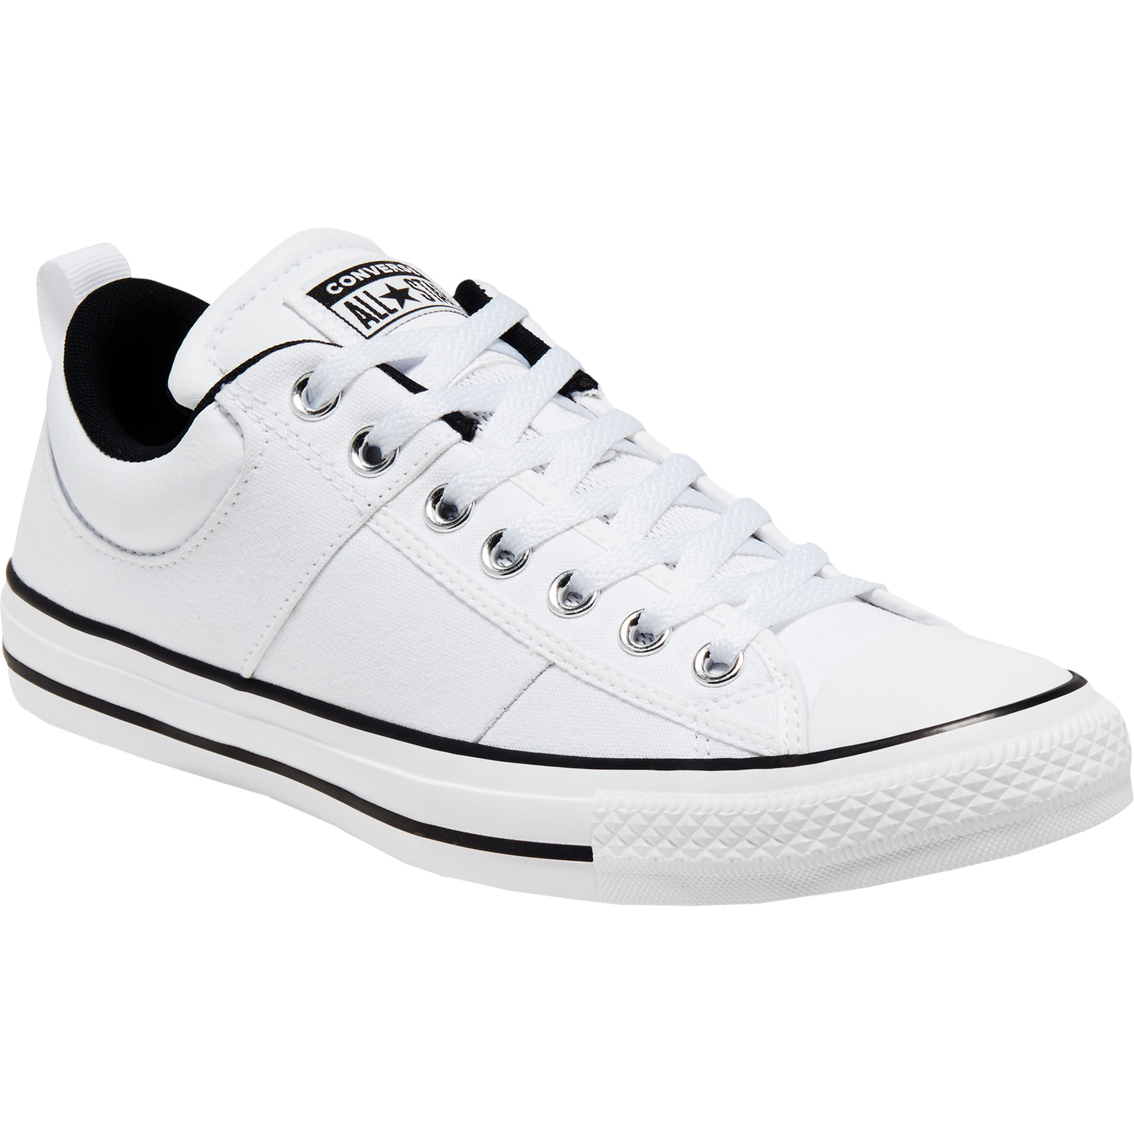 converse oxford shoes